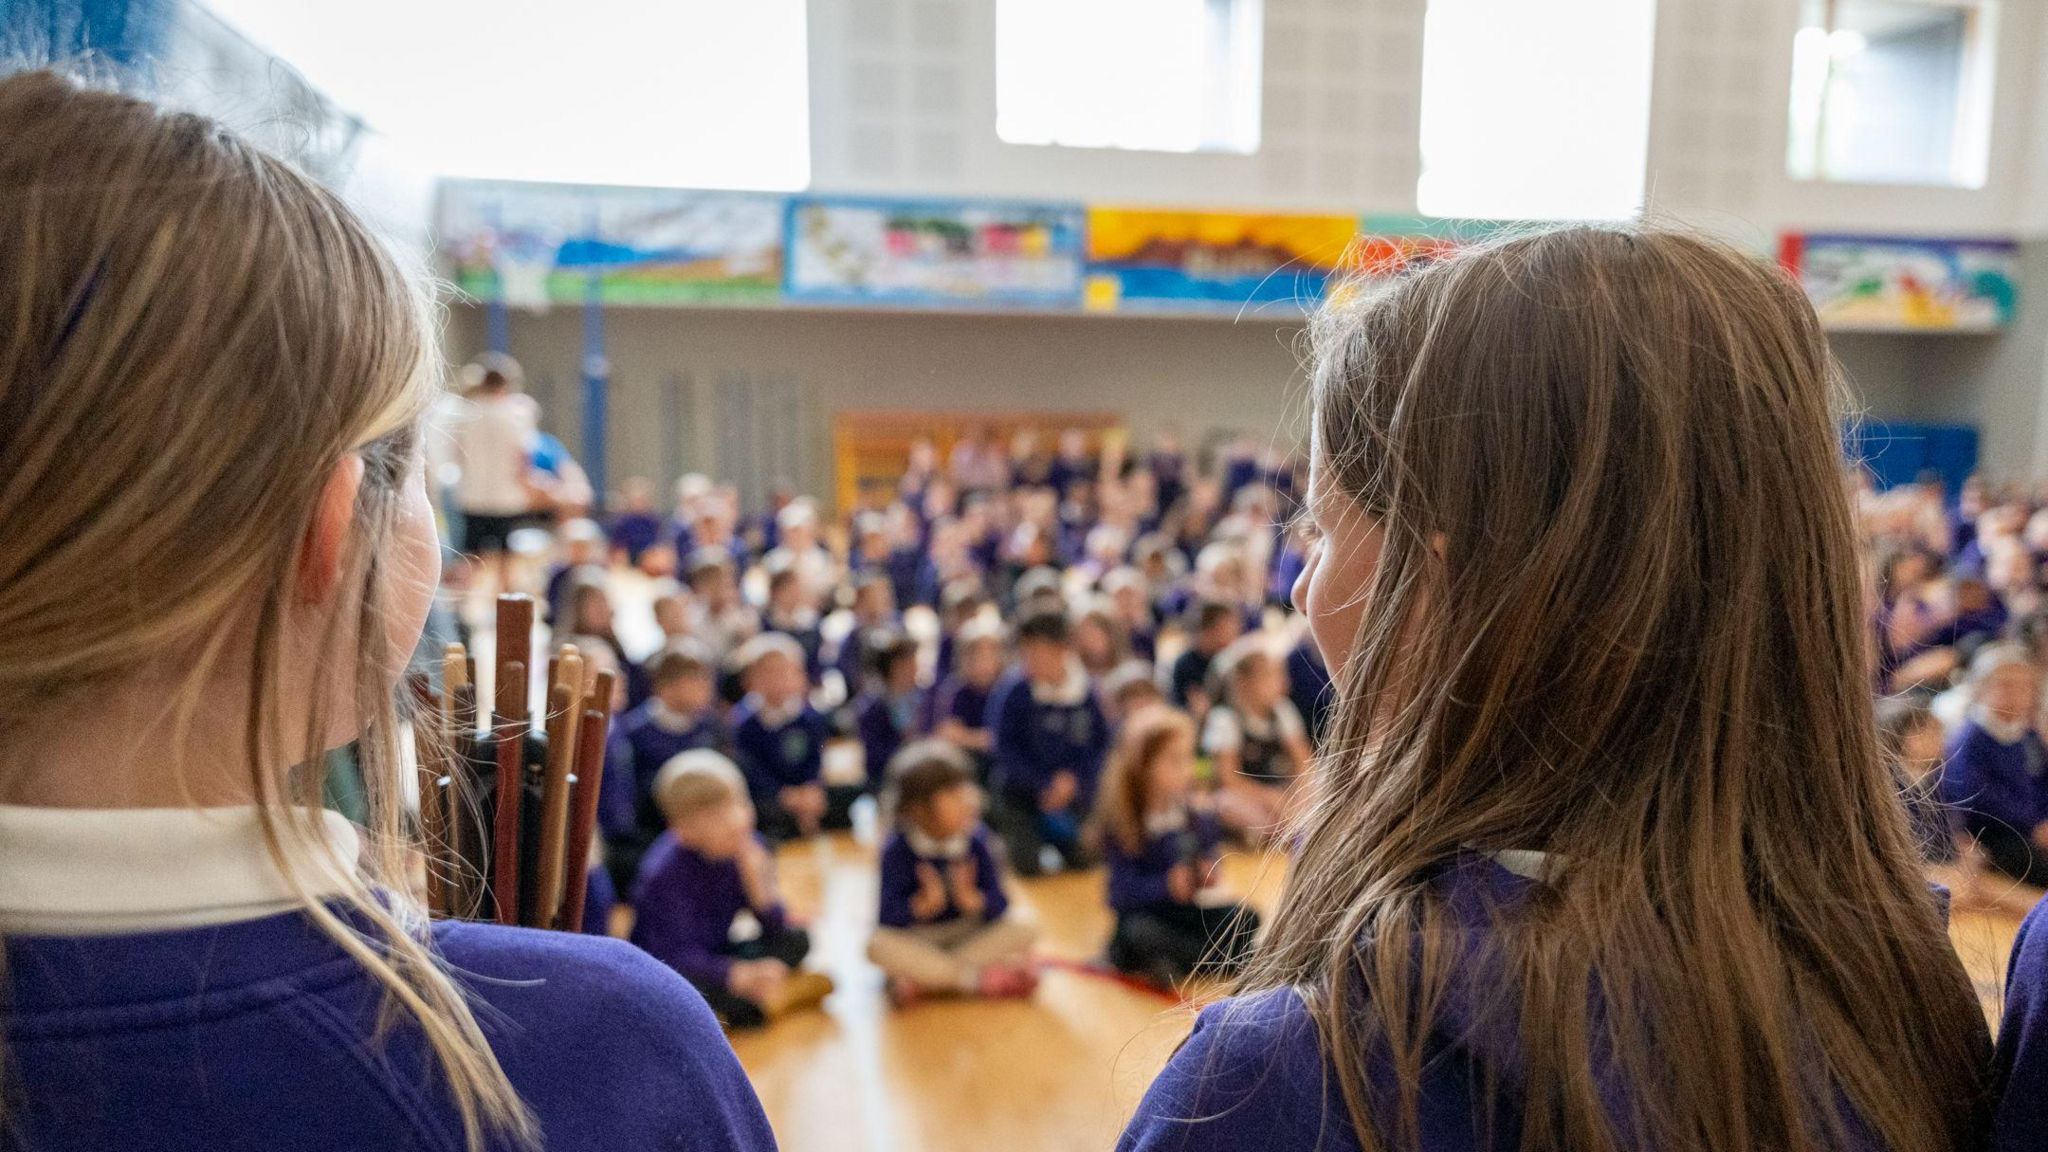 Pupils in purple uniforms sat in assembly